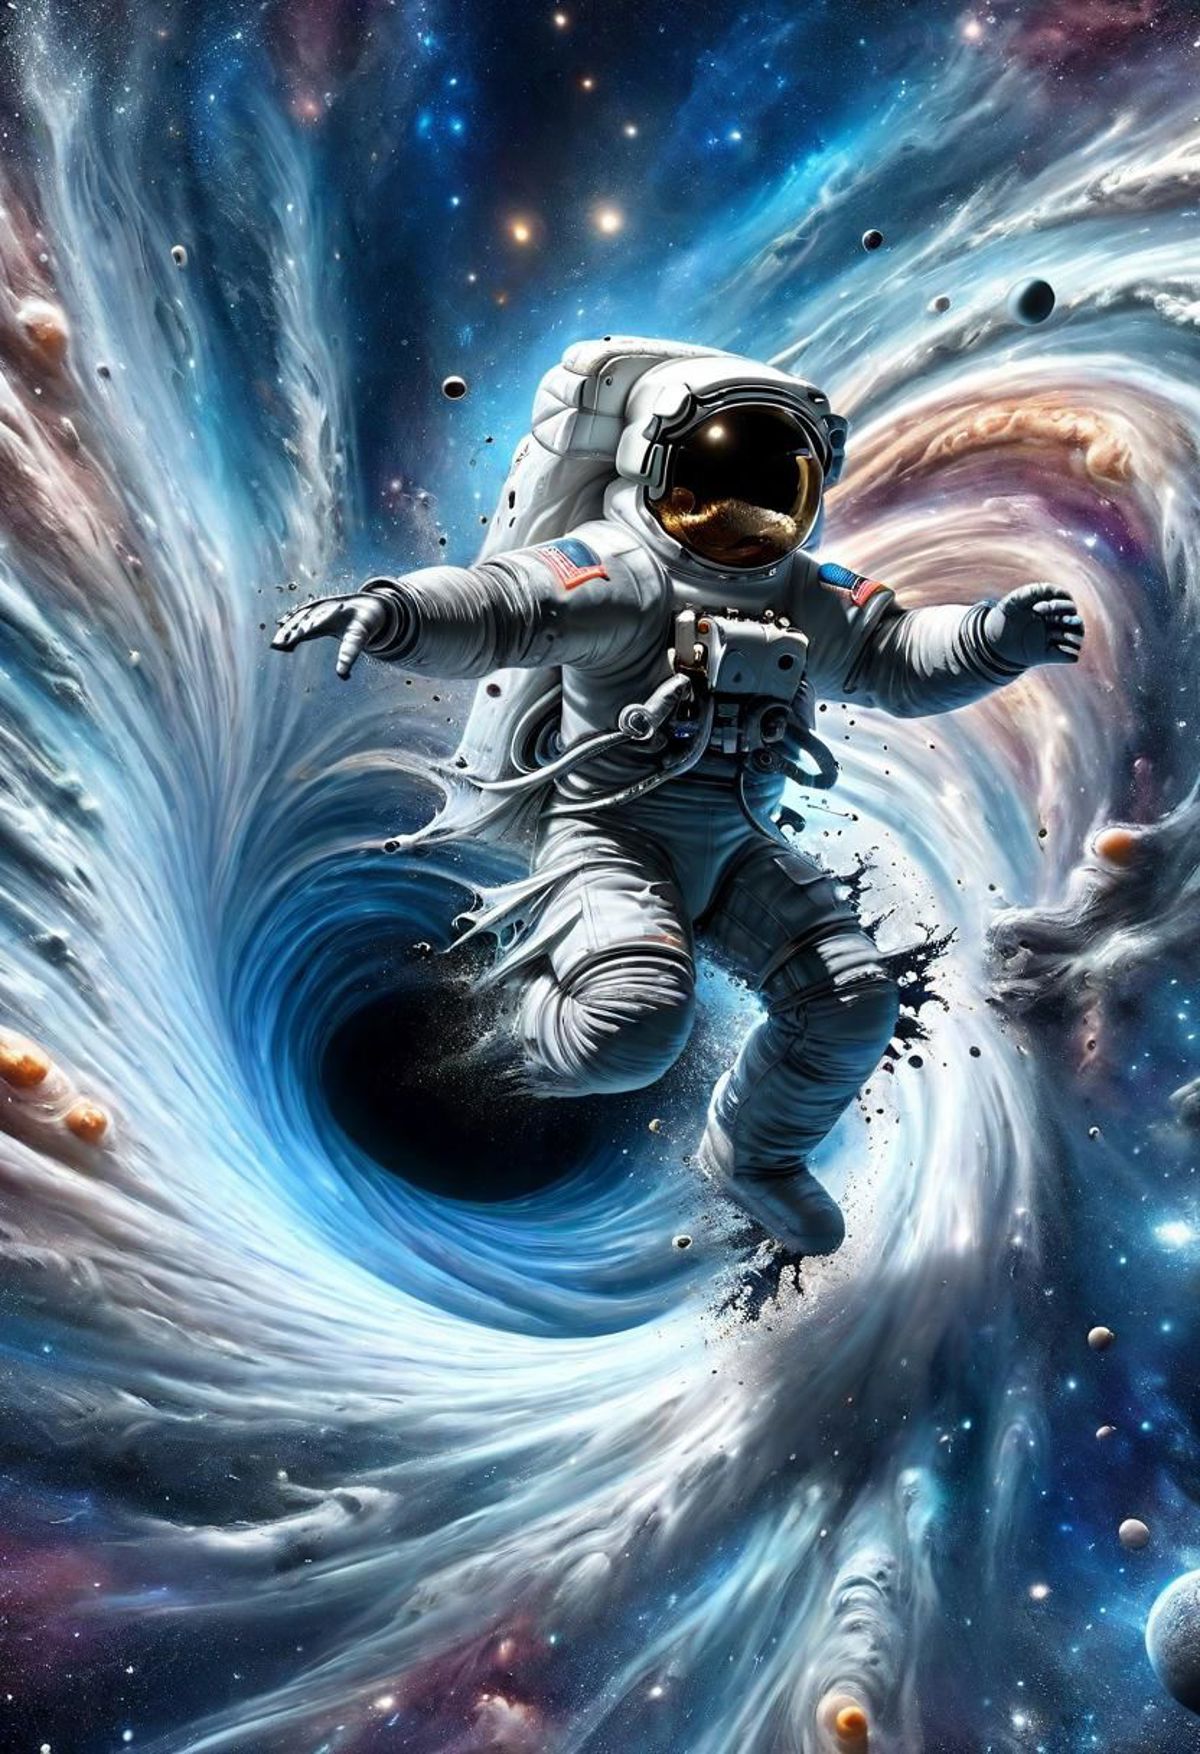 Astronaut in Space Suit in an Artistic Rendering of a Black Hole